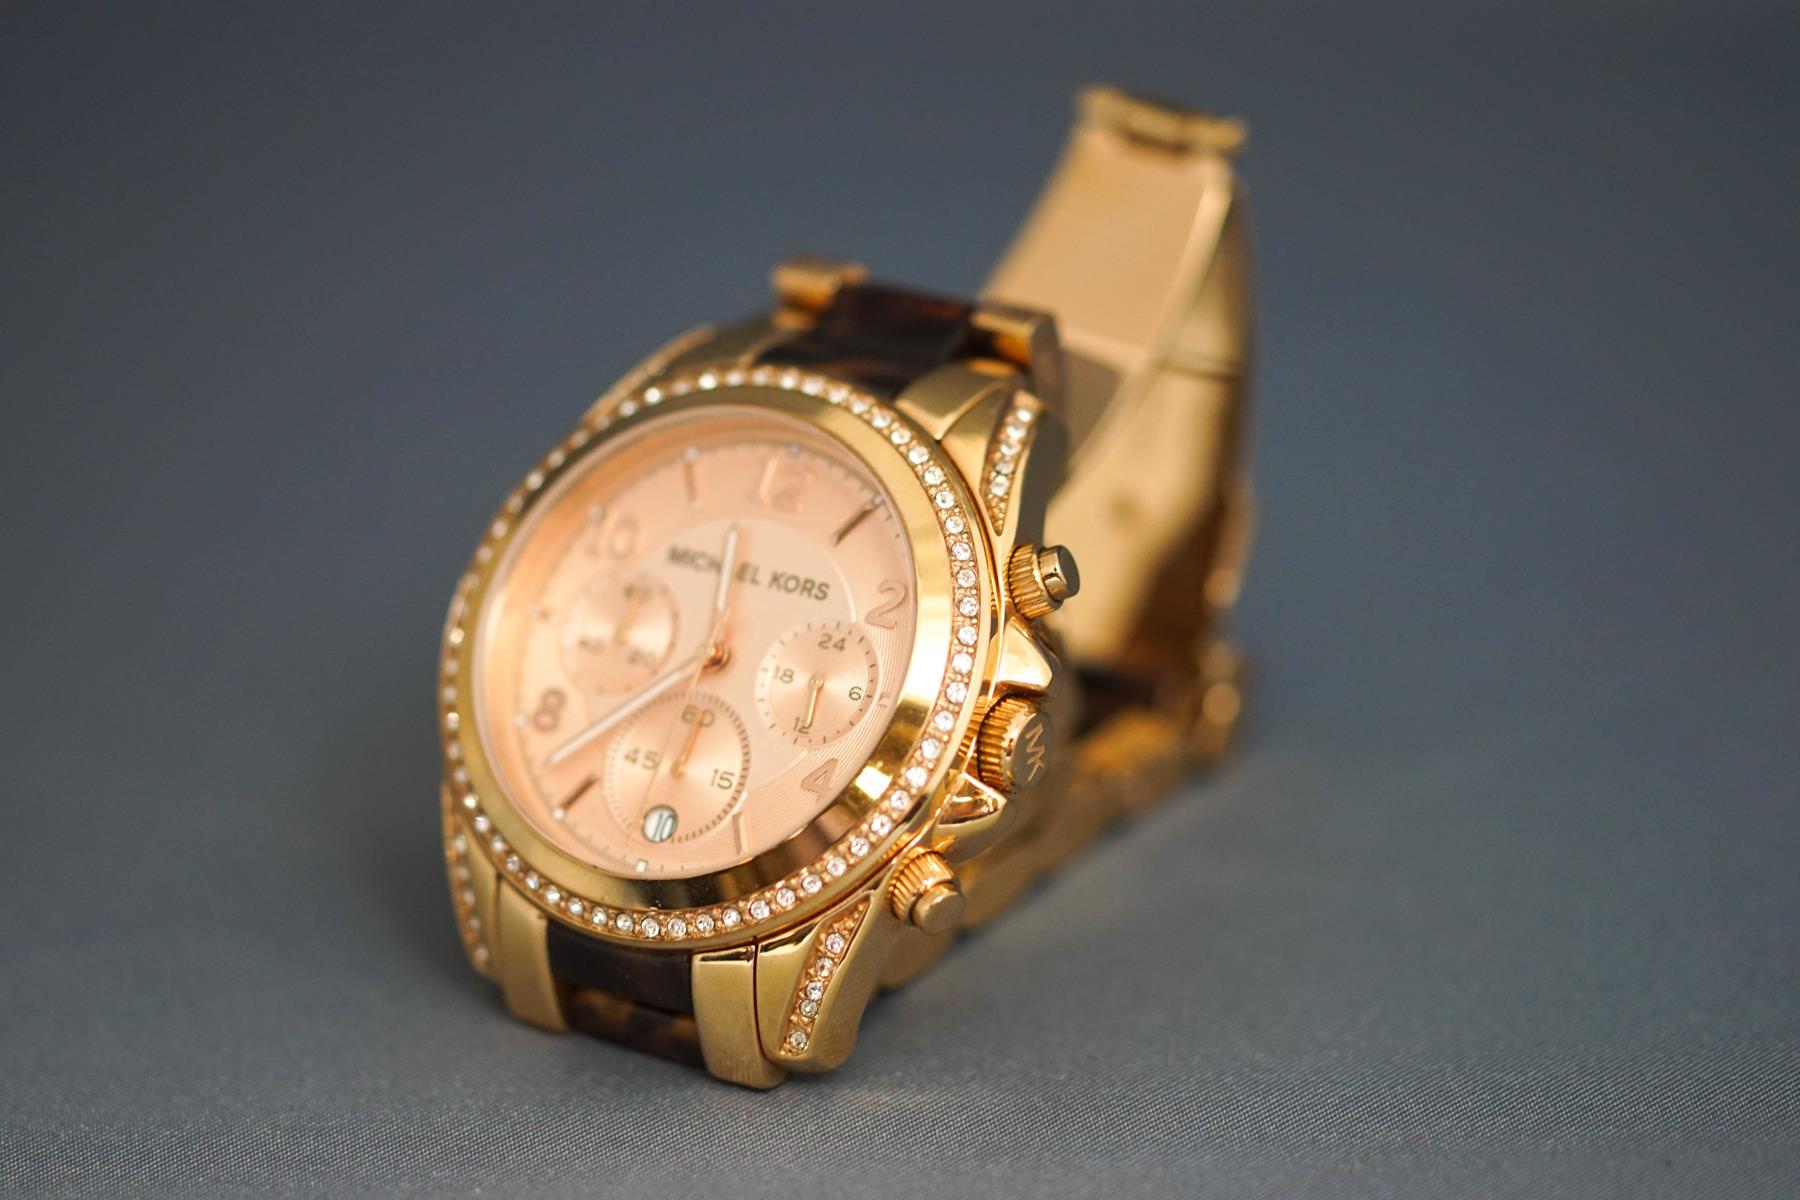 Michael Kors, a plated and tortoiseshell effect bracelet chronograph wristwatch, - Image 3 of 5